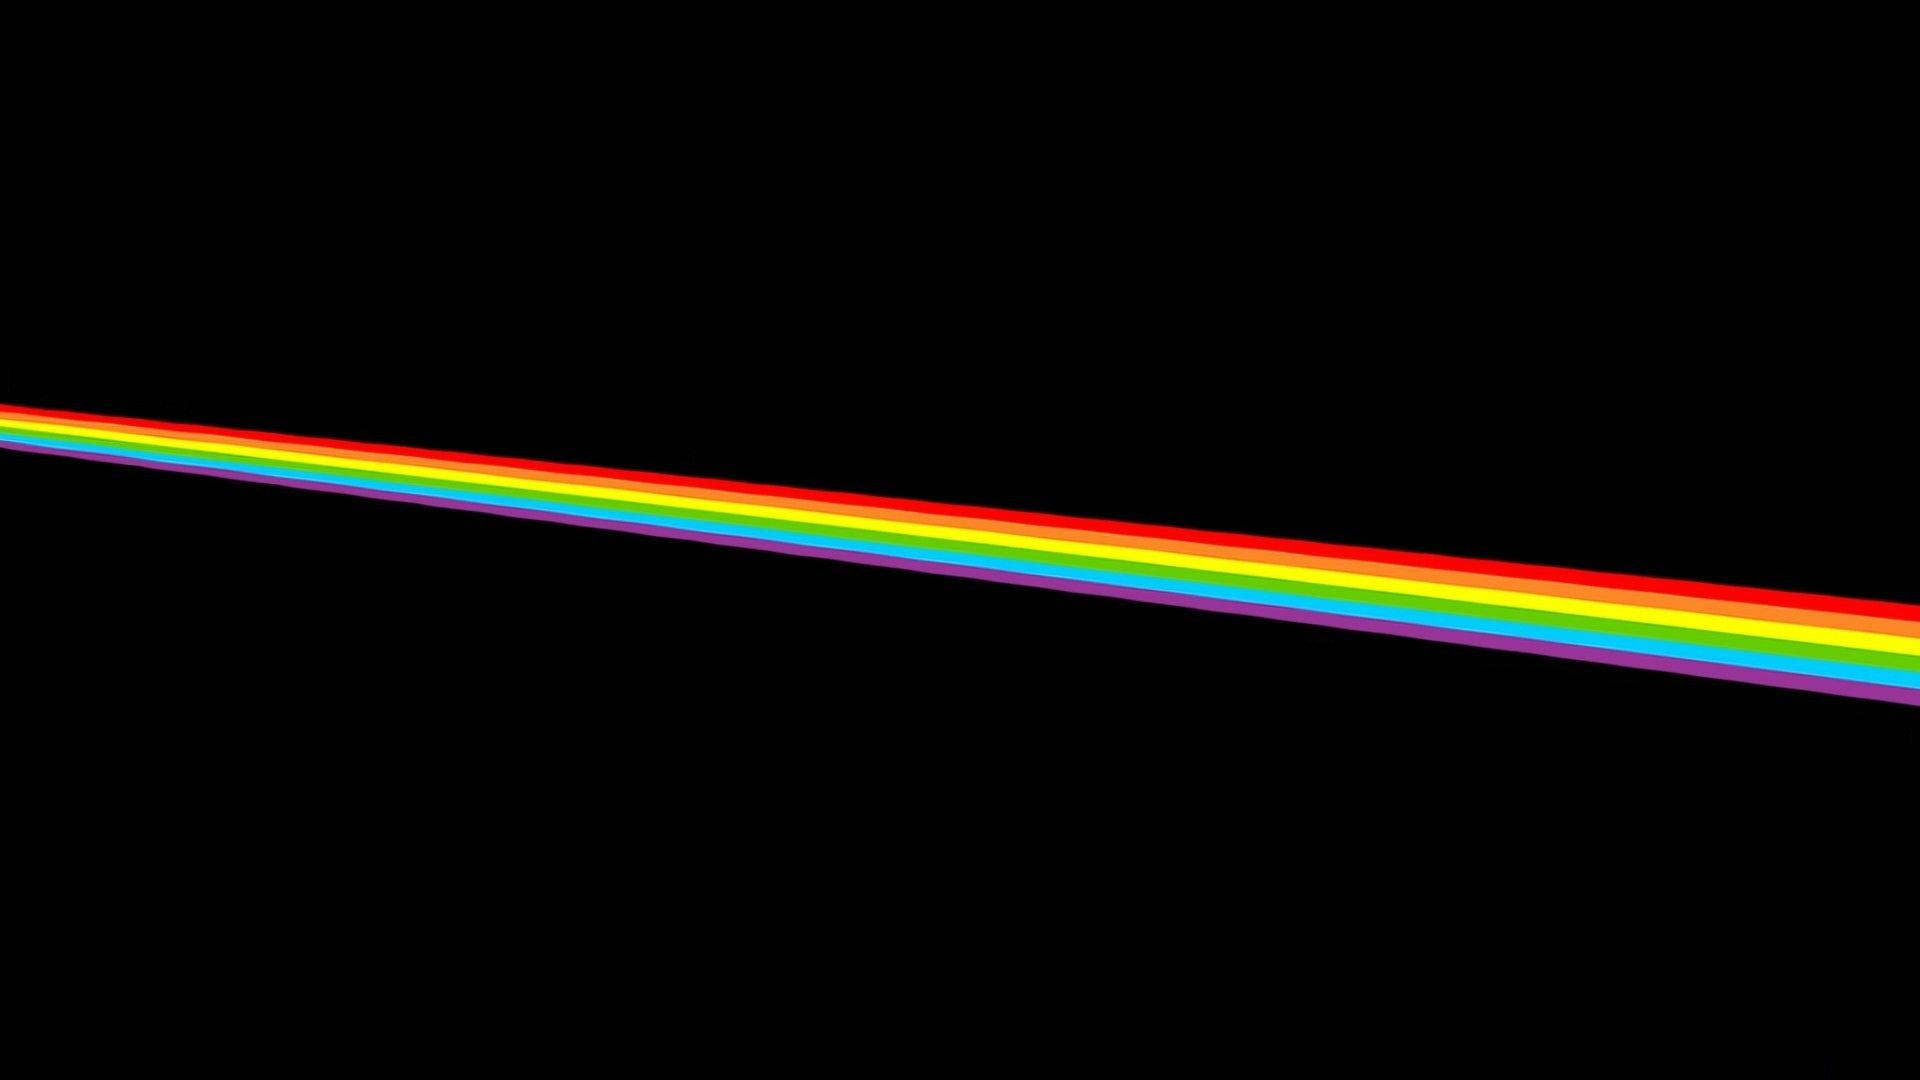 Free Pink Floyd Wallpaper Downloads, [200+] Pink Floyd Wallpapers for FREE  